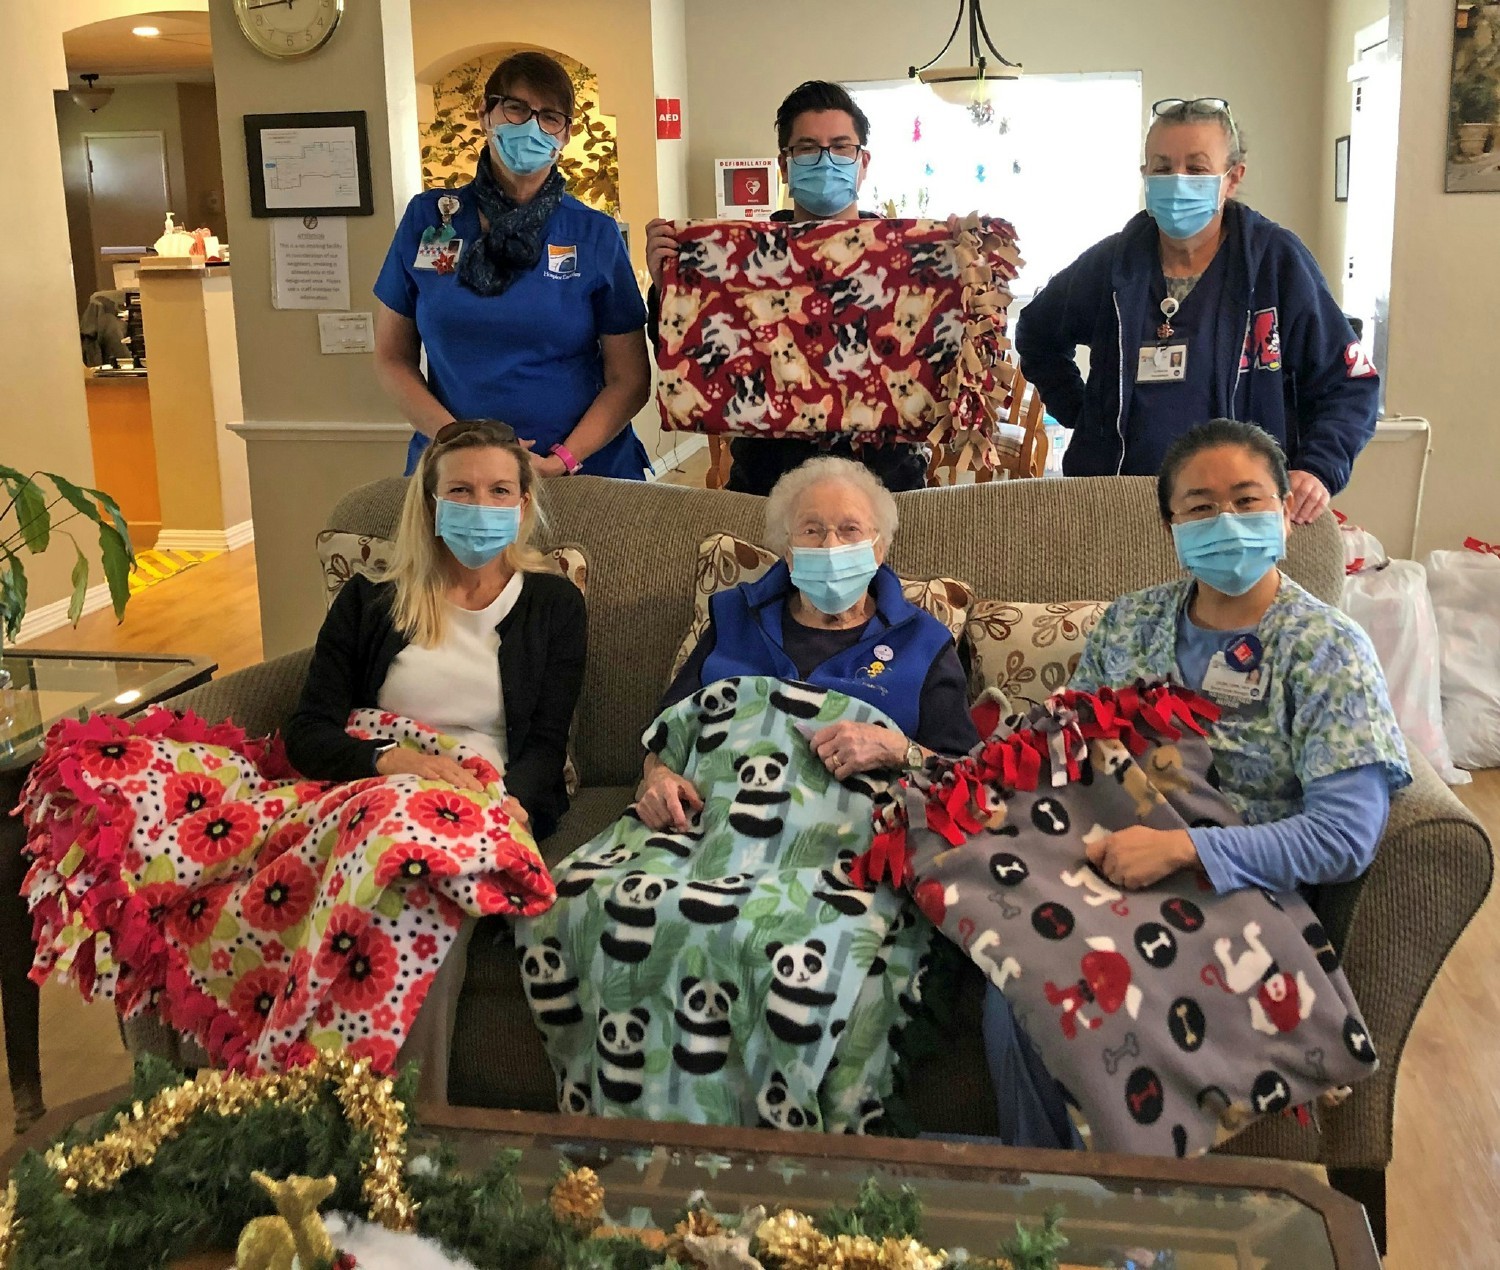 Our incredible volunteers make these blankets, keeping our patients feeling warm and loved.